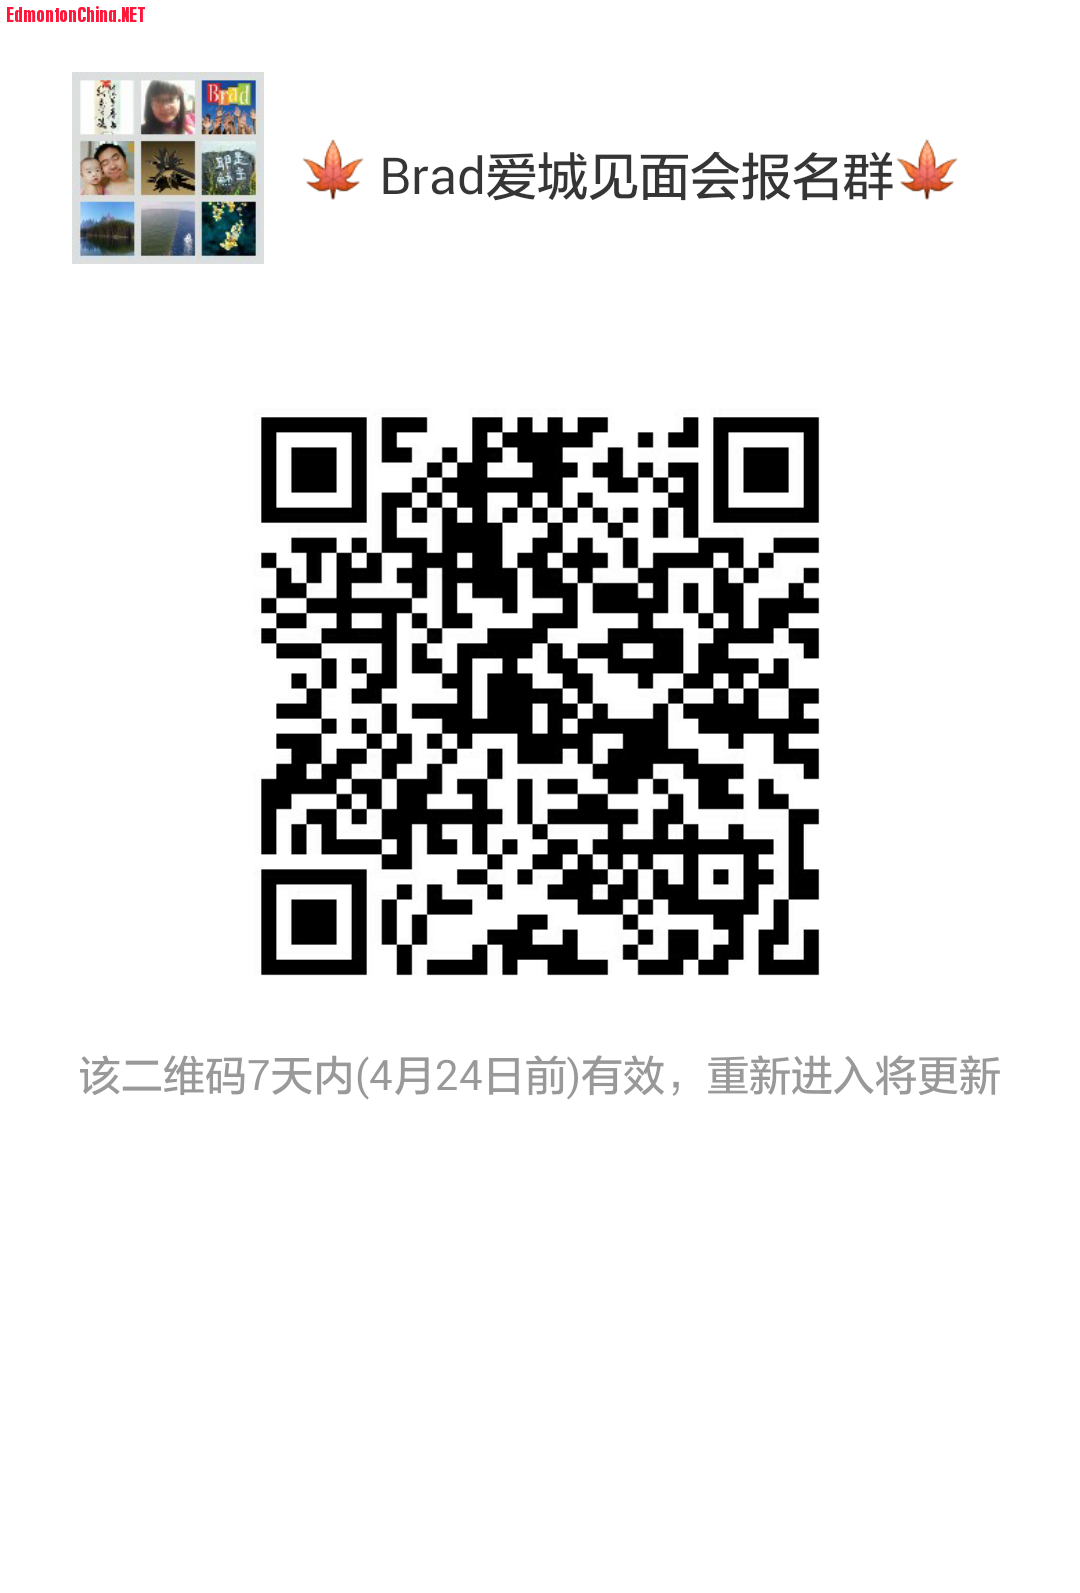 mmqrcode1492468994376.png